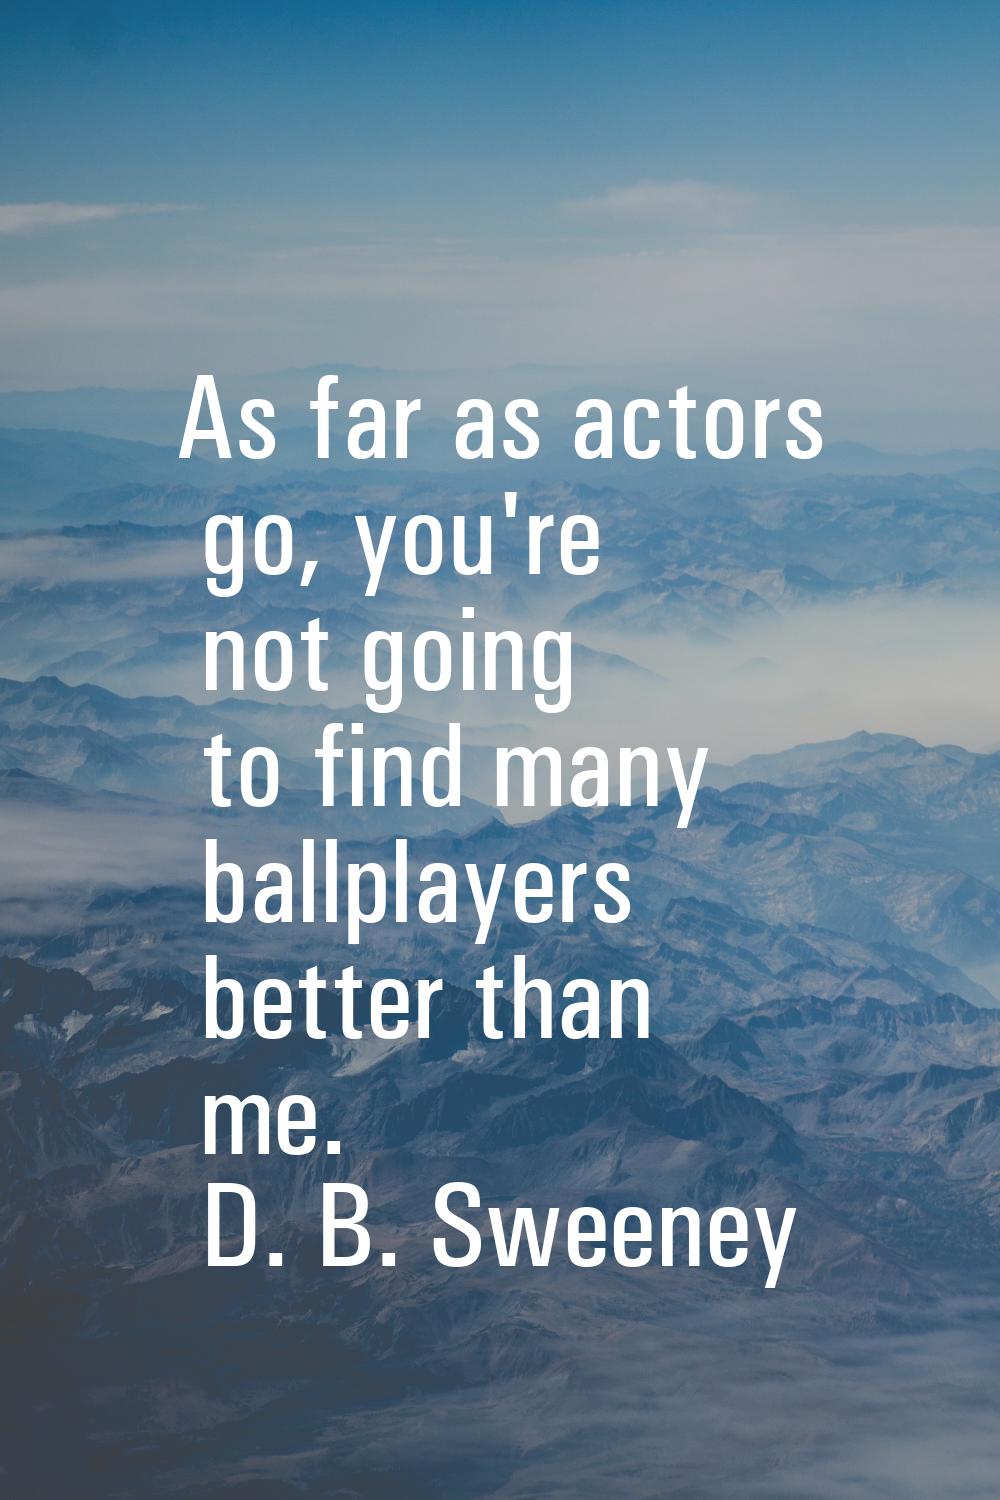 As far as actors go, you're not going to find many ballplayers better than me.